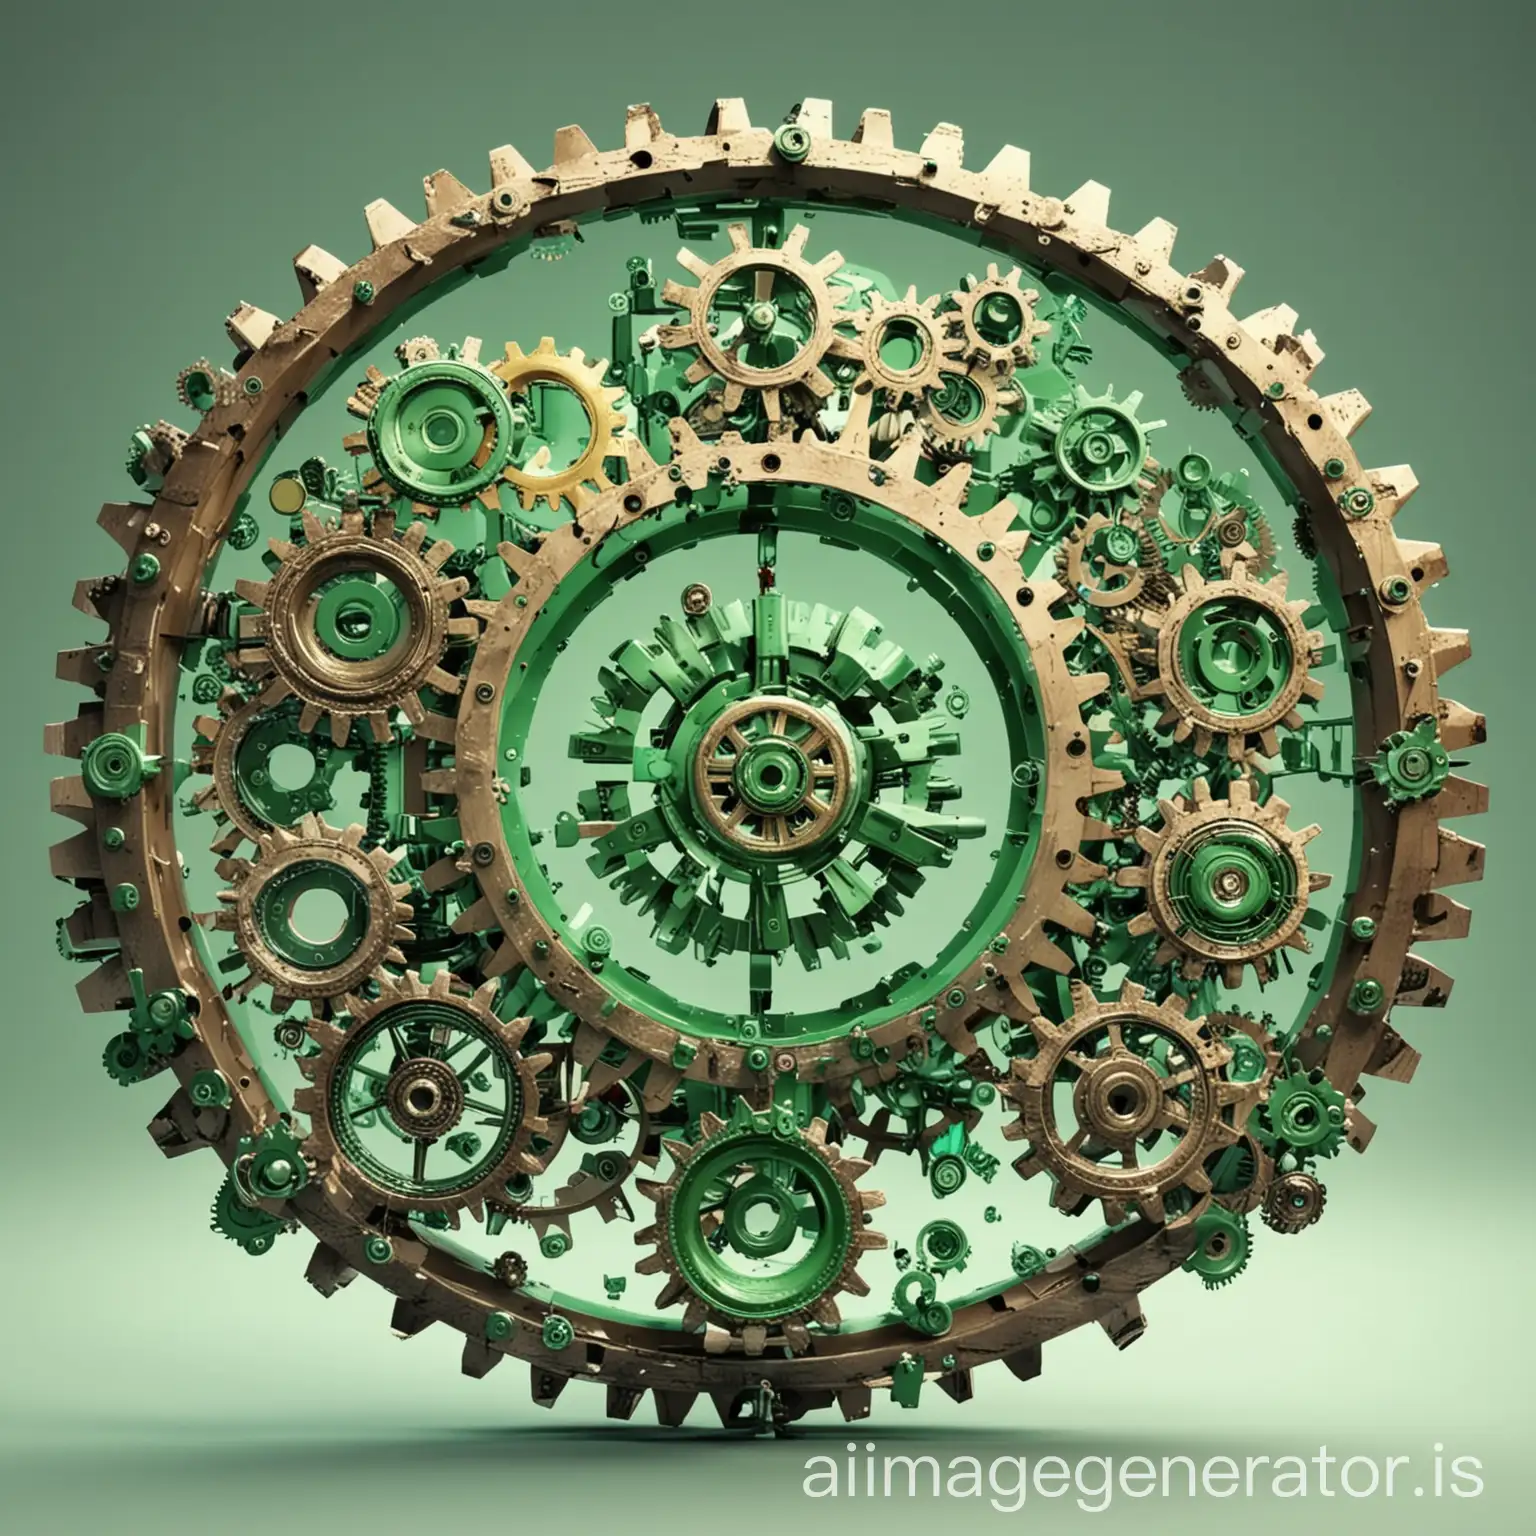 cogs showing economic growth, ai/digitalisation, inequality reduction, green technologies. the cogs should be cartoon, one filled with a symbol of each concept mentioned. please redo the last image but remove the people and background, just the cog system shown